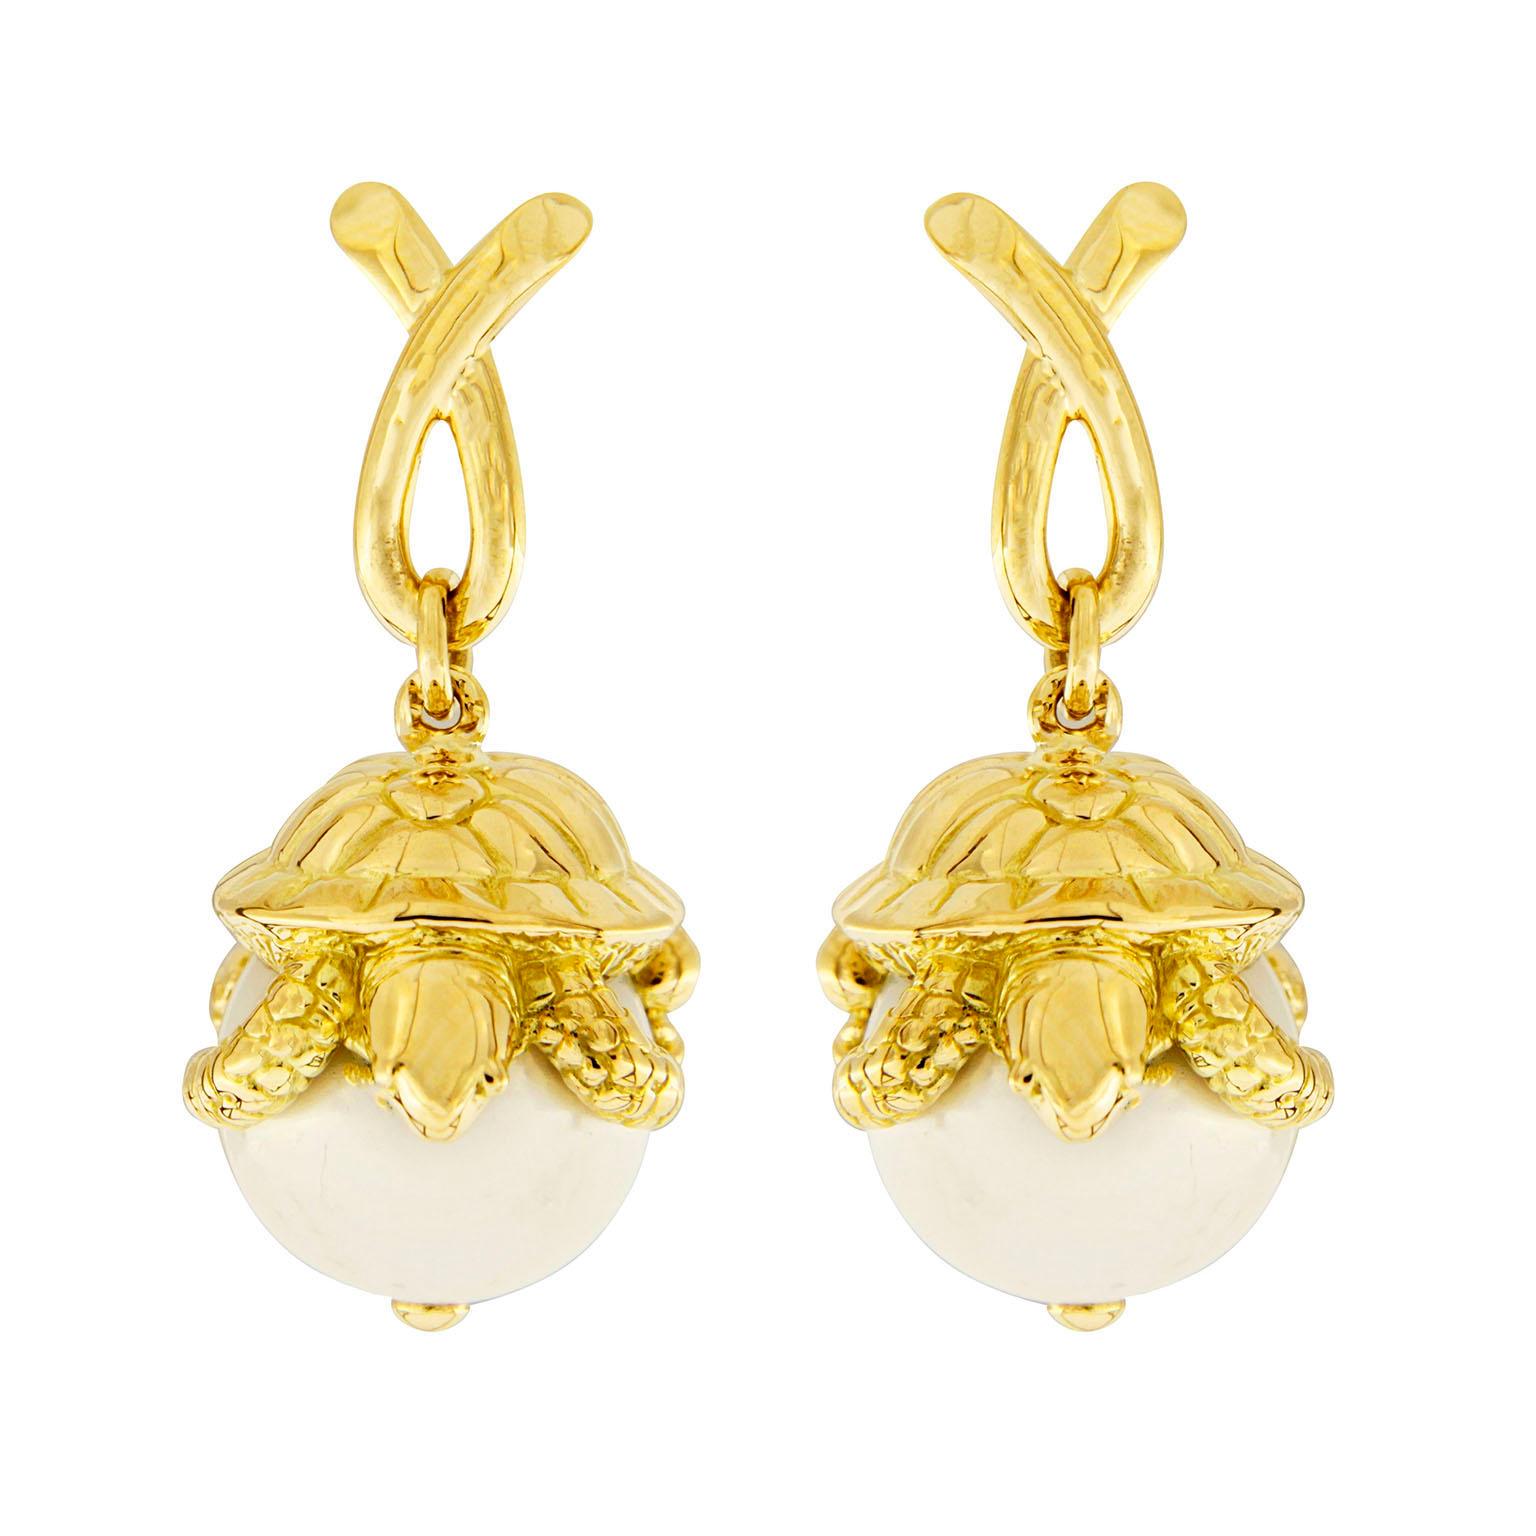 Turtle Sitting on South Sea Pearl Earrings connect animals and jewels of the water. The animals are shaped in 18k yellow gold which features everything from eyes to shell ridges and even claws. They peer down from their perch atop white South Sea